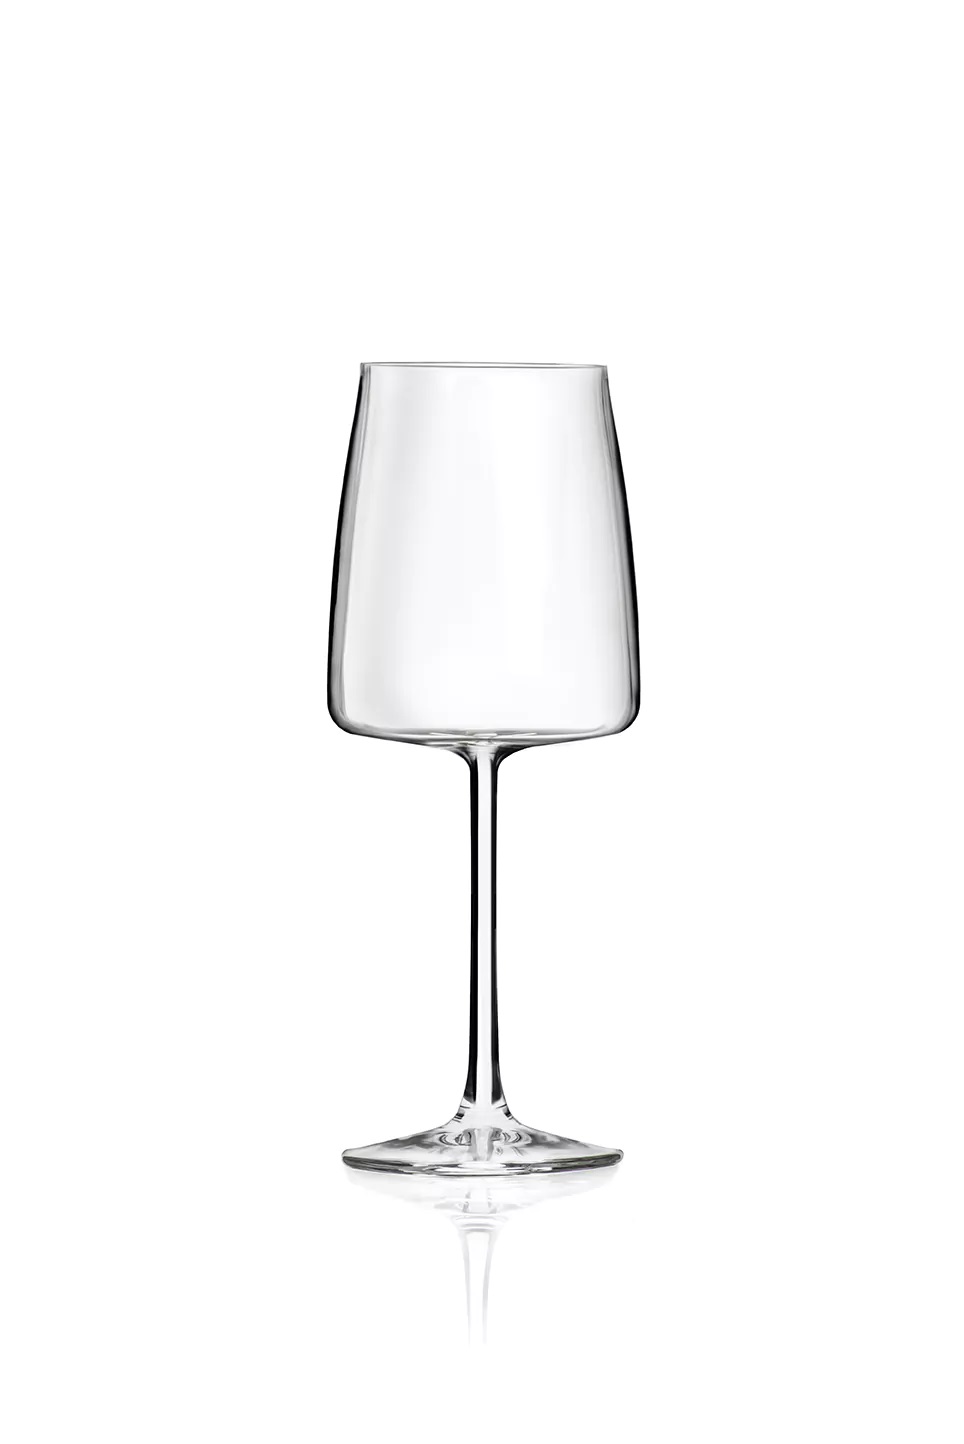 ESSENTIAL  WINE GLASS 43cl LUXION PROFESSIONAL RCR ITALY